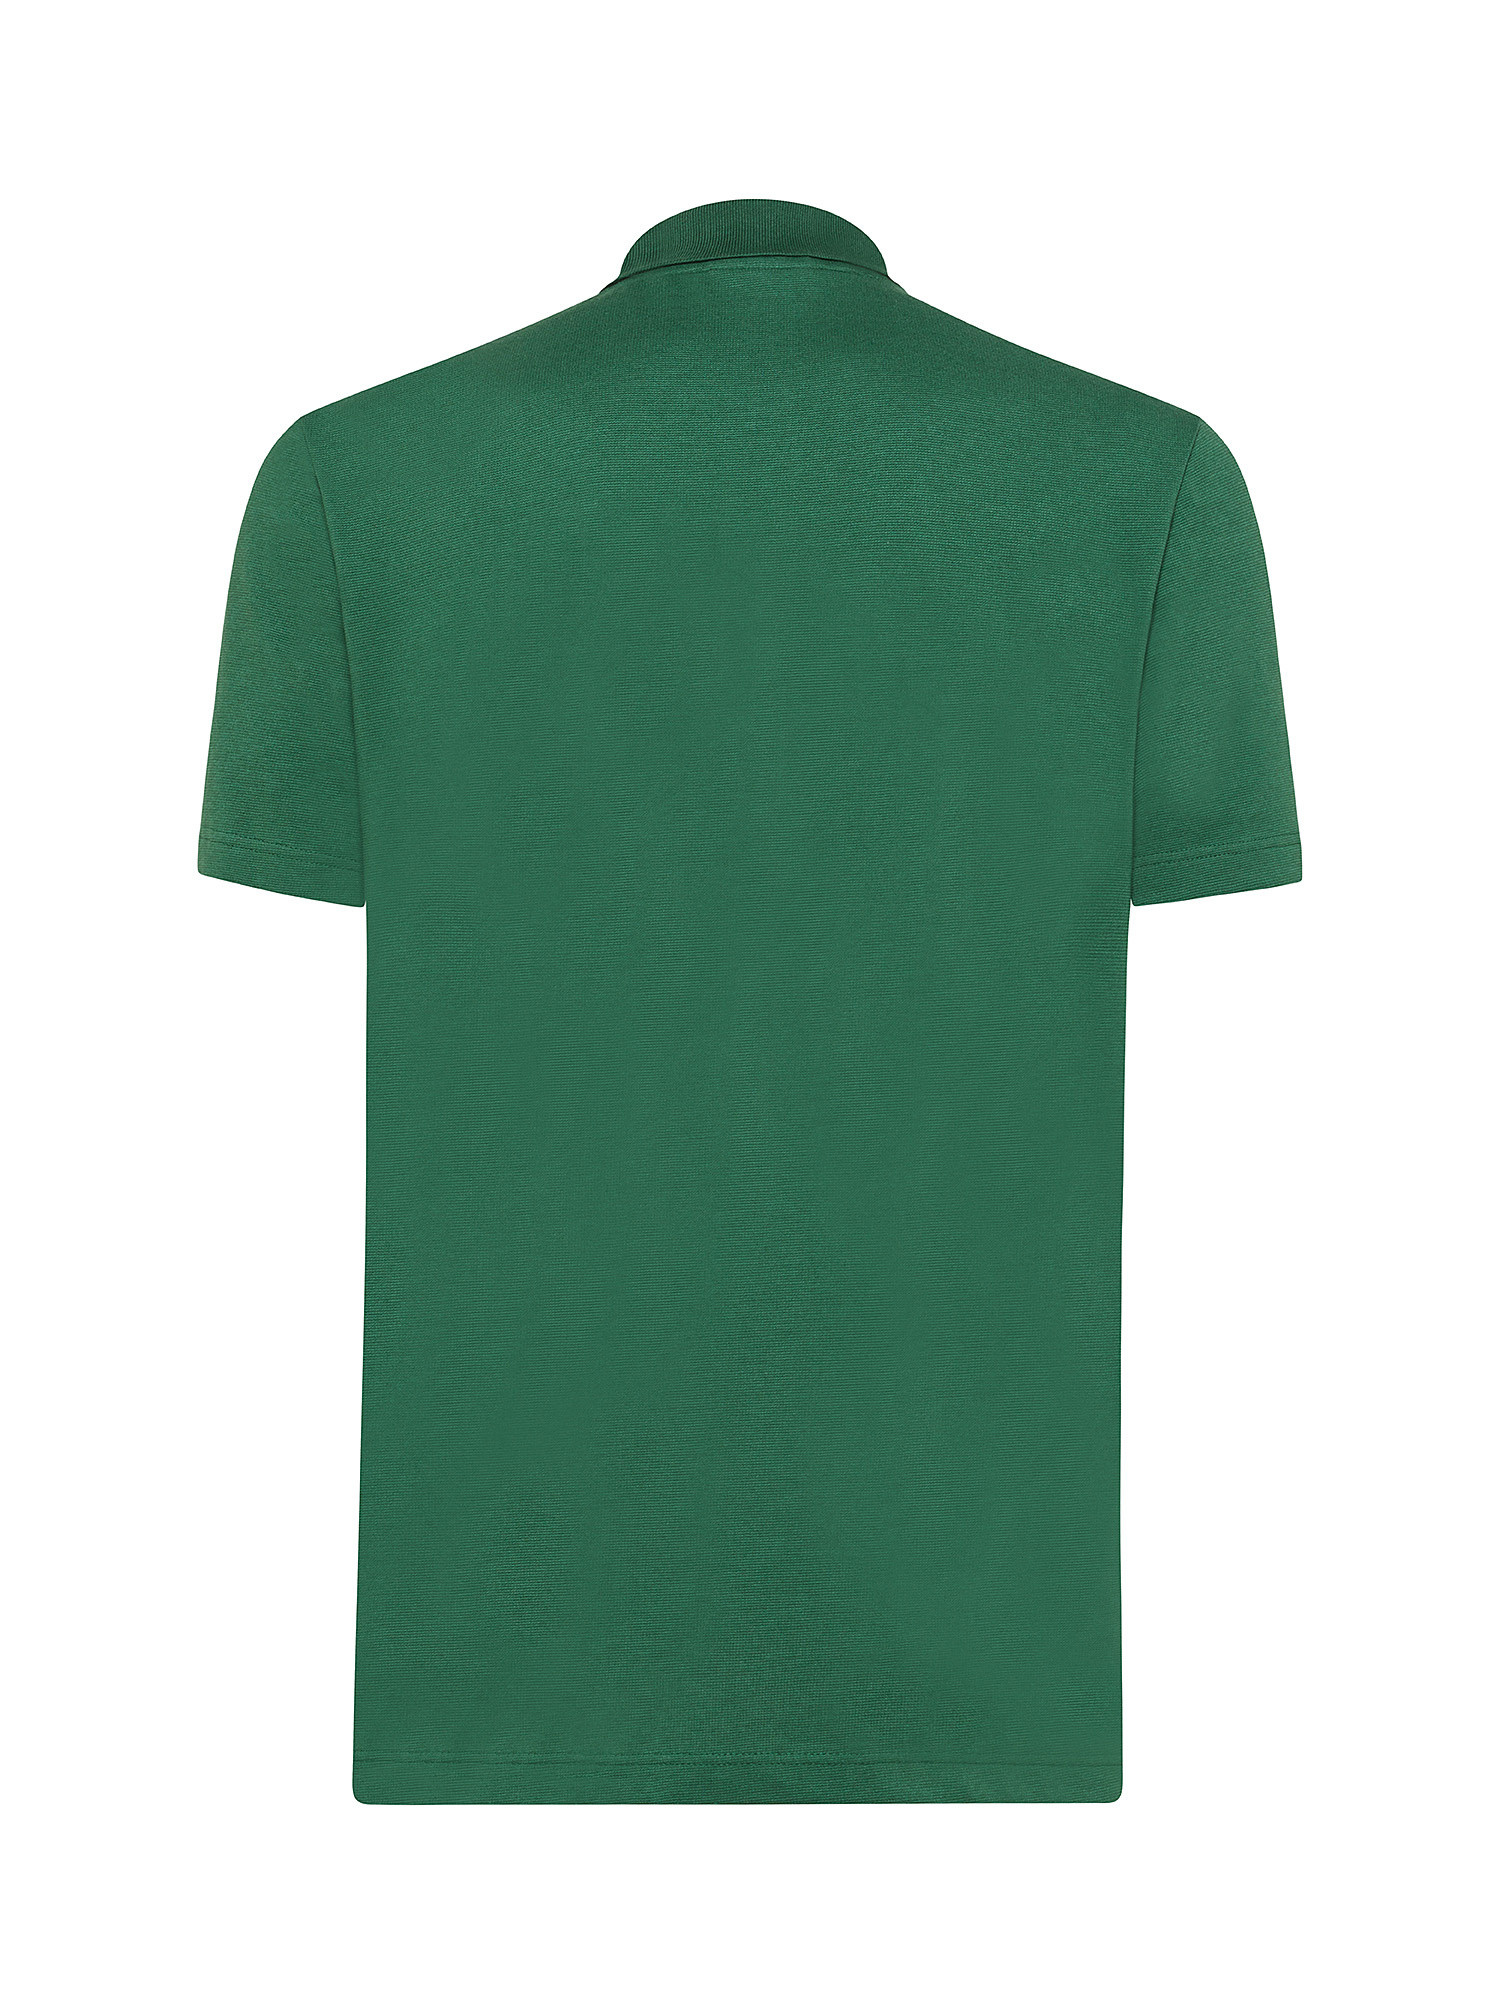 Lacoste - Regular fit stretch polo, Green, large image number 1